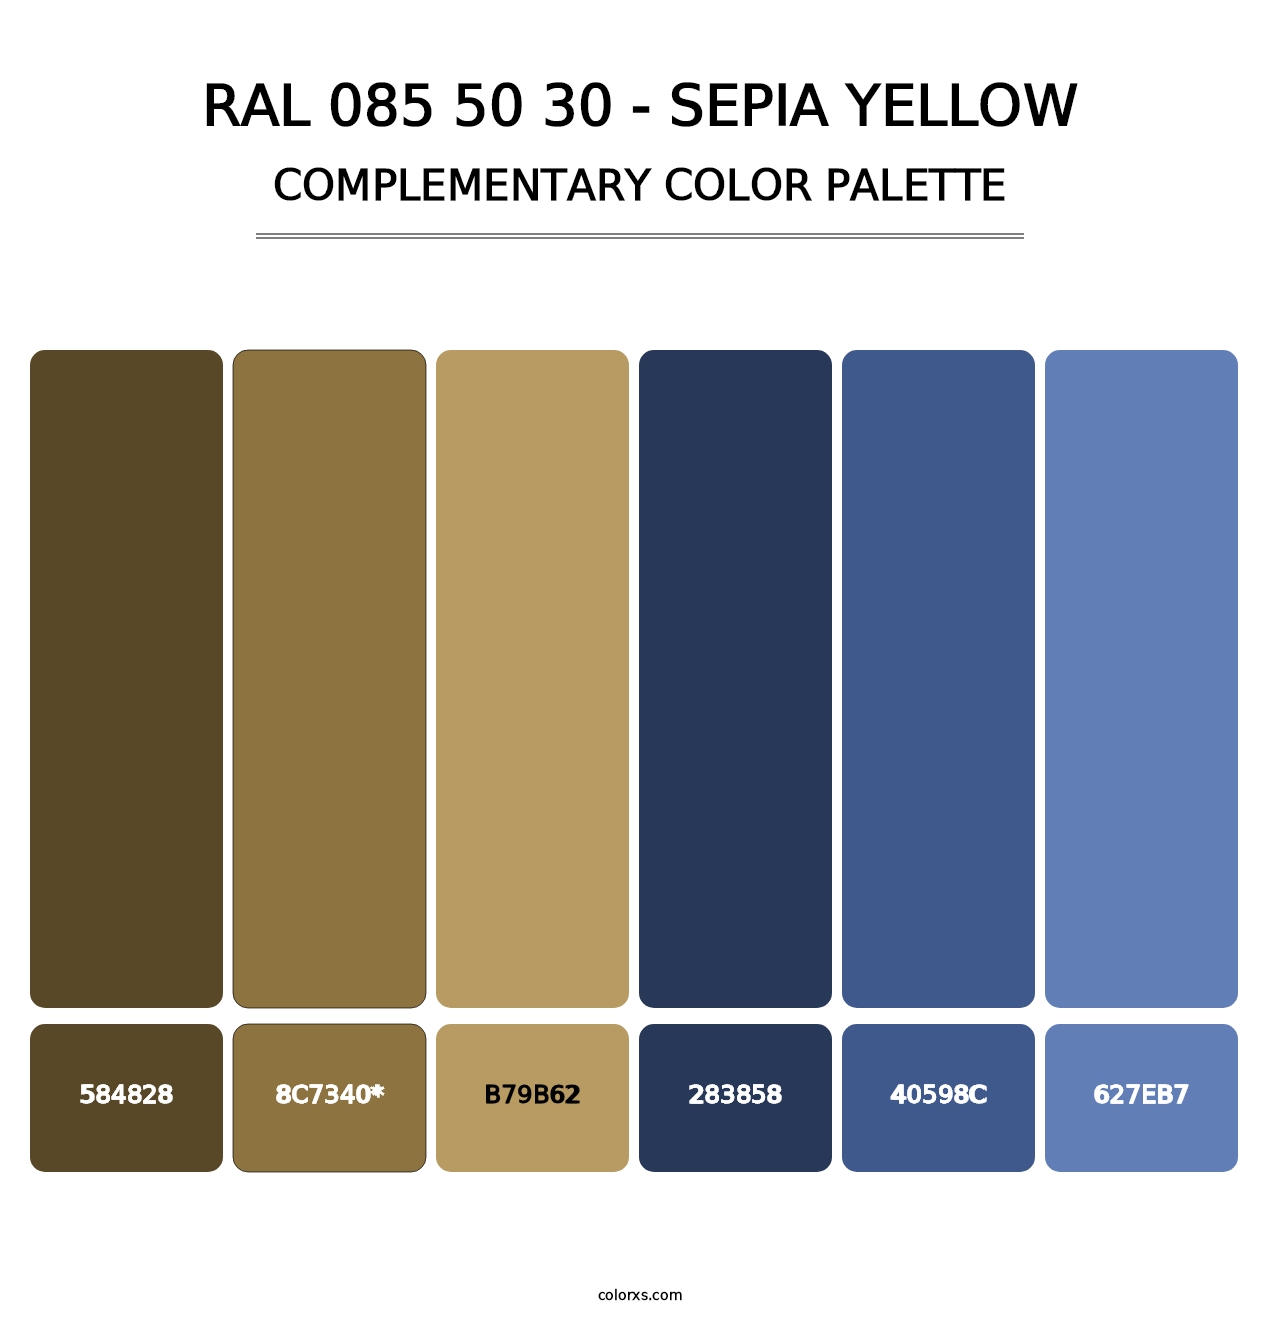 RAL 085 50 30 - Sepia Yellow - Complementary Color Palette